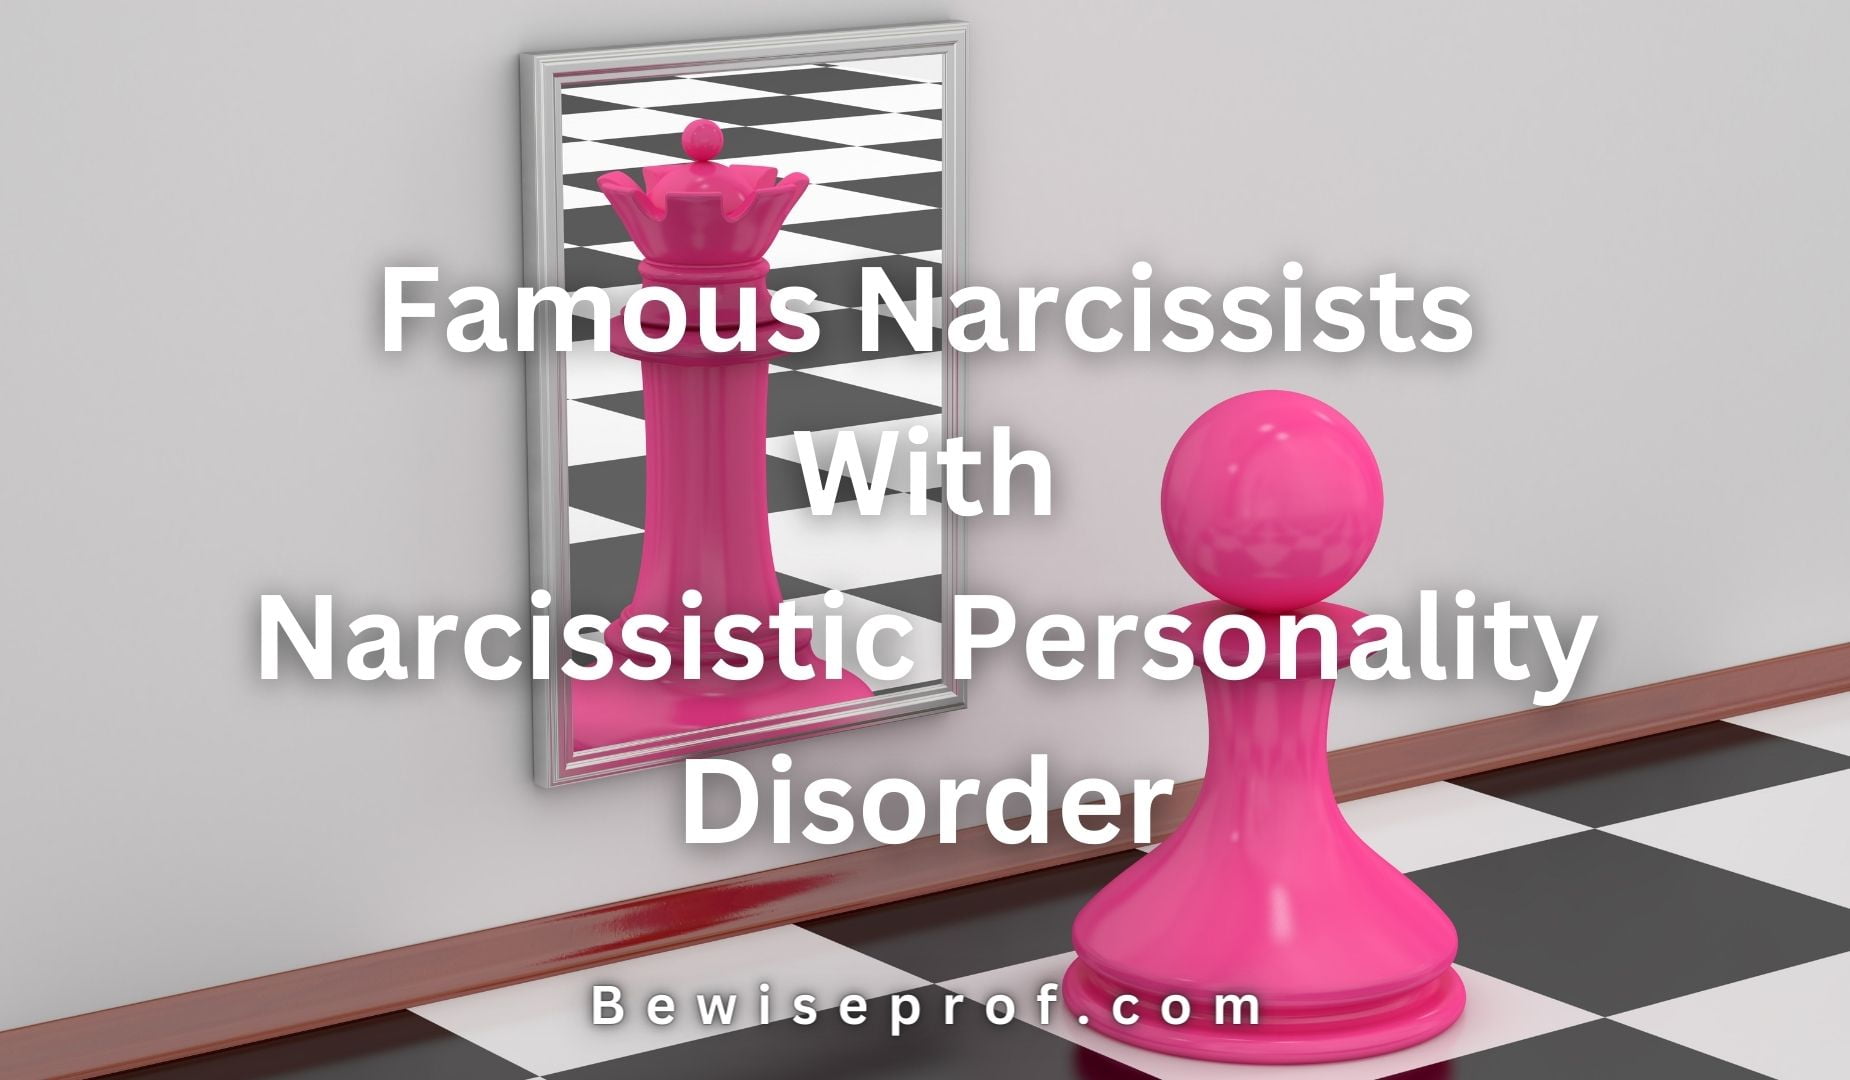 Famous Narcissists With Narcissistic Personality Disorder